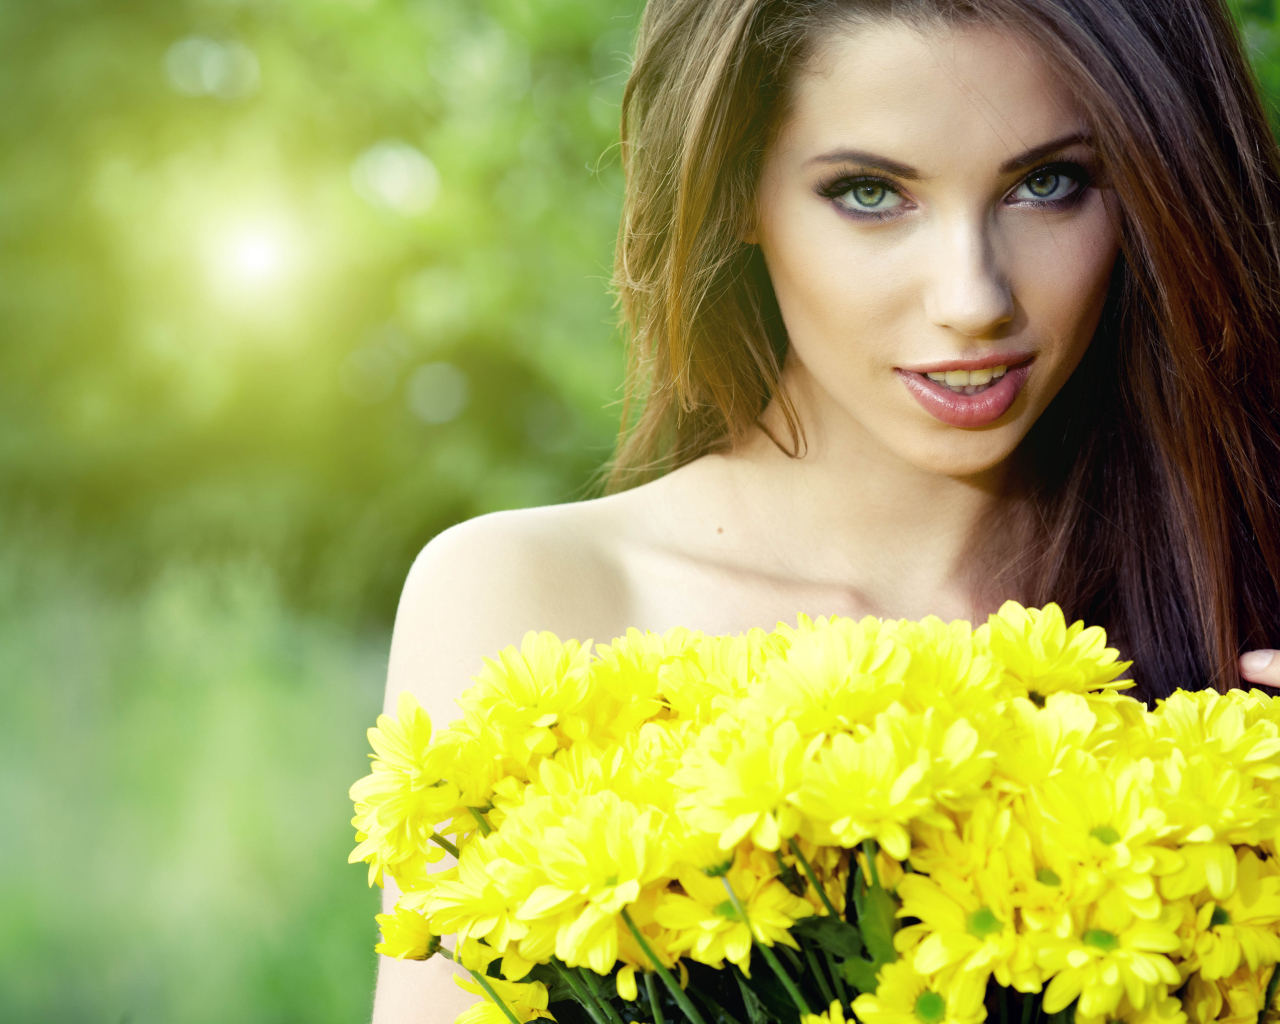 Young beautiful girl with a bouquet of yellow chrysanthemums